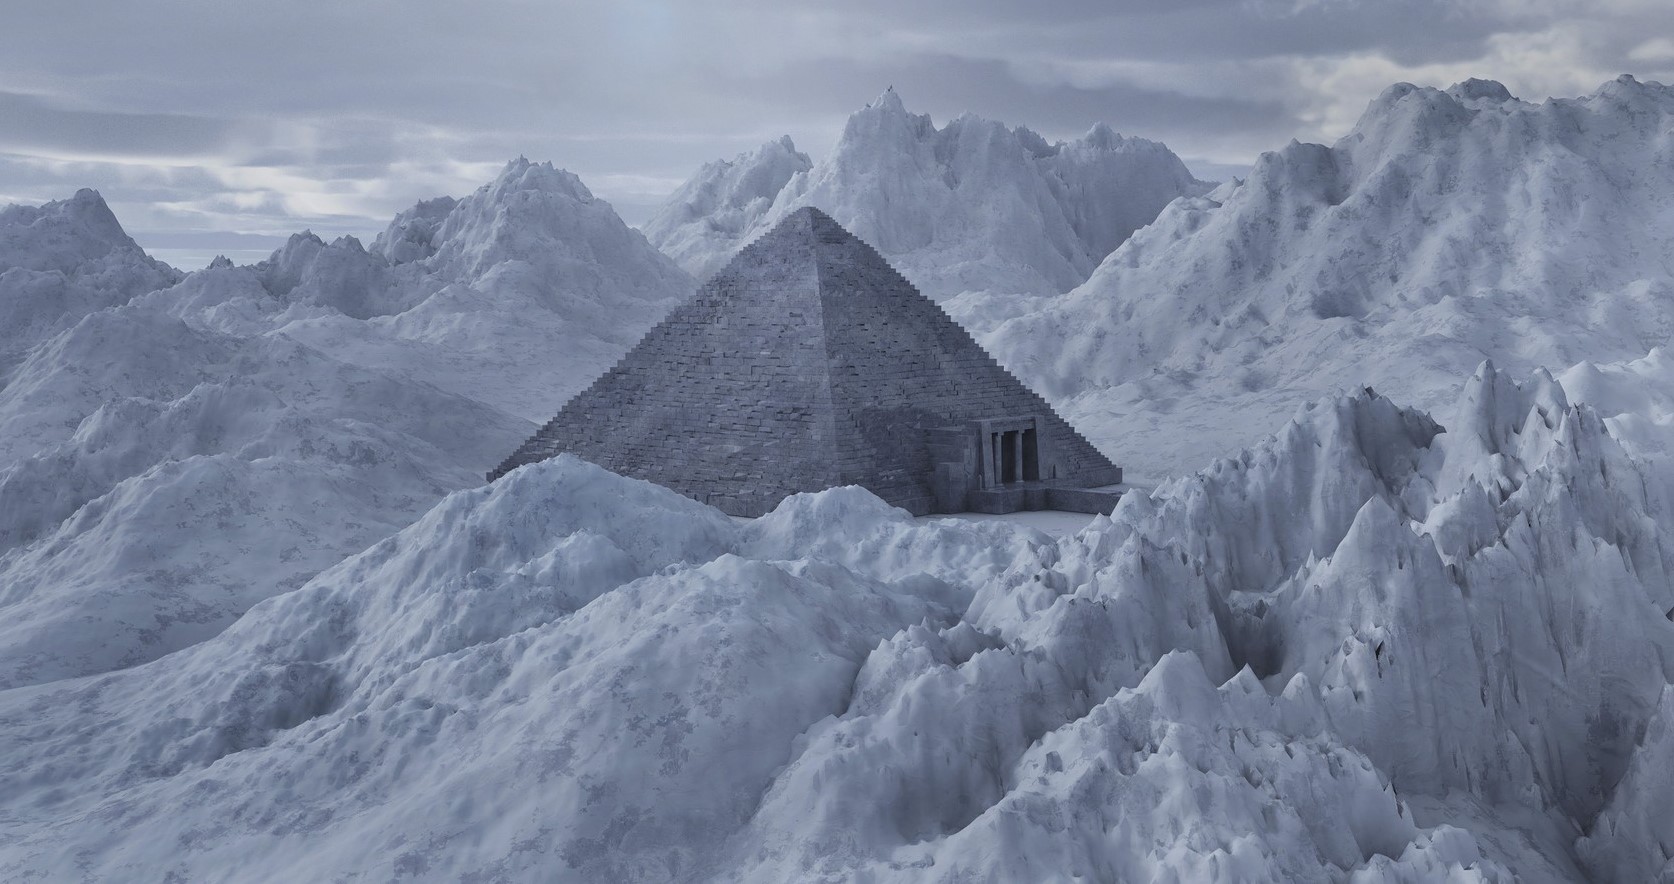 Huge pyramids have been found in Antarctica, and scientists have realized how they got there